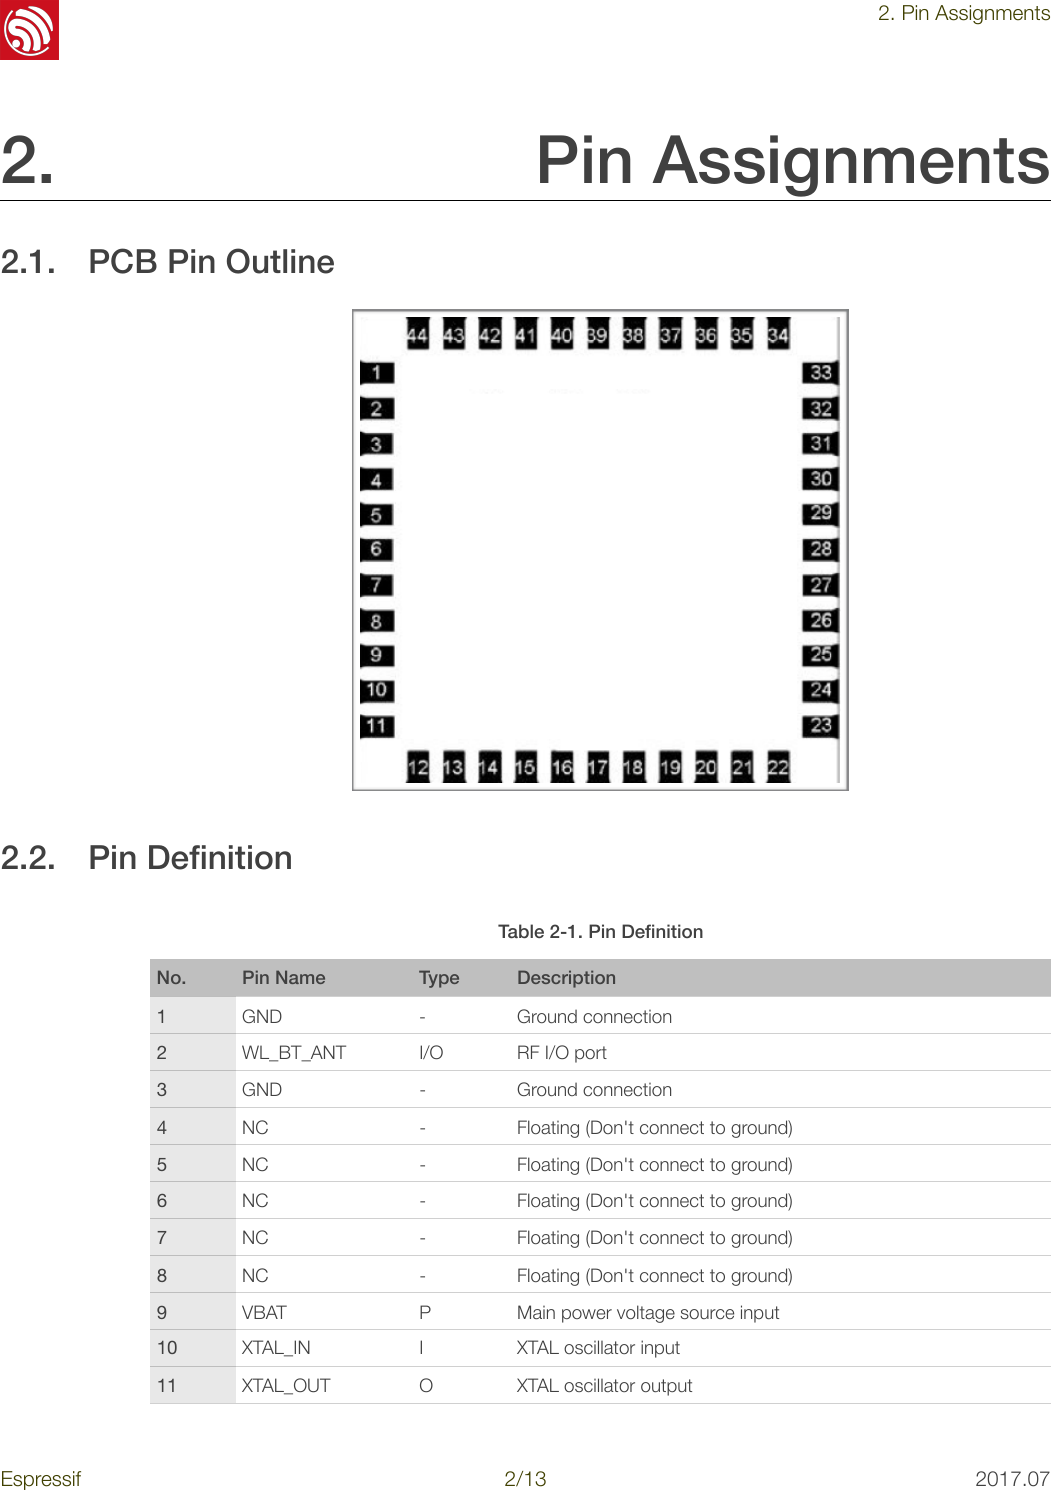 !2. Pin Assignments2. Pin Assignments 2.1. PCB Pin Outline ! 2.2. Pin Deﬁnition Table 2-1. Pin DeﬁnitionNo. Pin Name Type Description1GND - Ground connection2WL_BT_ANT I/O RF I/O port3GND - Ground connection4NC - Floating (Don&apos;t connect to ground)5NC - Floating (Don&apos;t connect to ground)6NC - Floating (Don&apos;t connect to ground)7NC - Floating (Don&apos;t connect to ground)8NC - Floating (Don&apos;t connect to ground)9VBAT P Main power voltage source input10 XTAL_IN I XTAL oscillator input11 XTAL_OUT O XTAL oscillator outputEspressif !/!2 13 2017.07